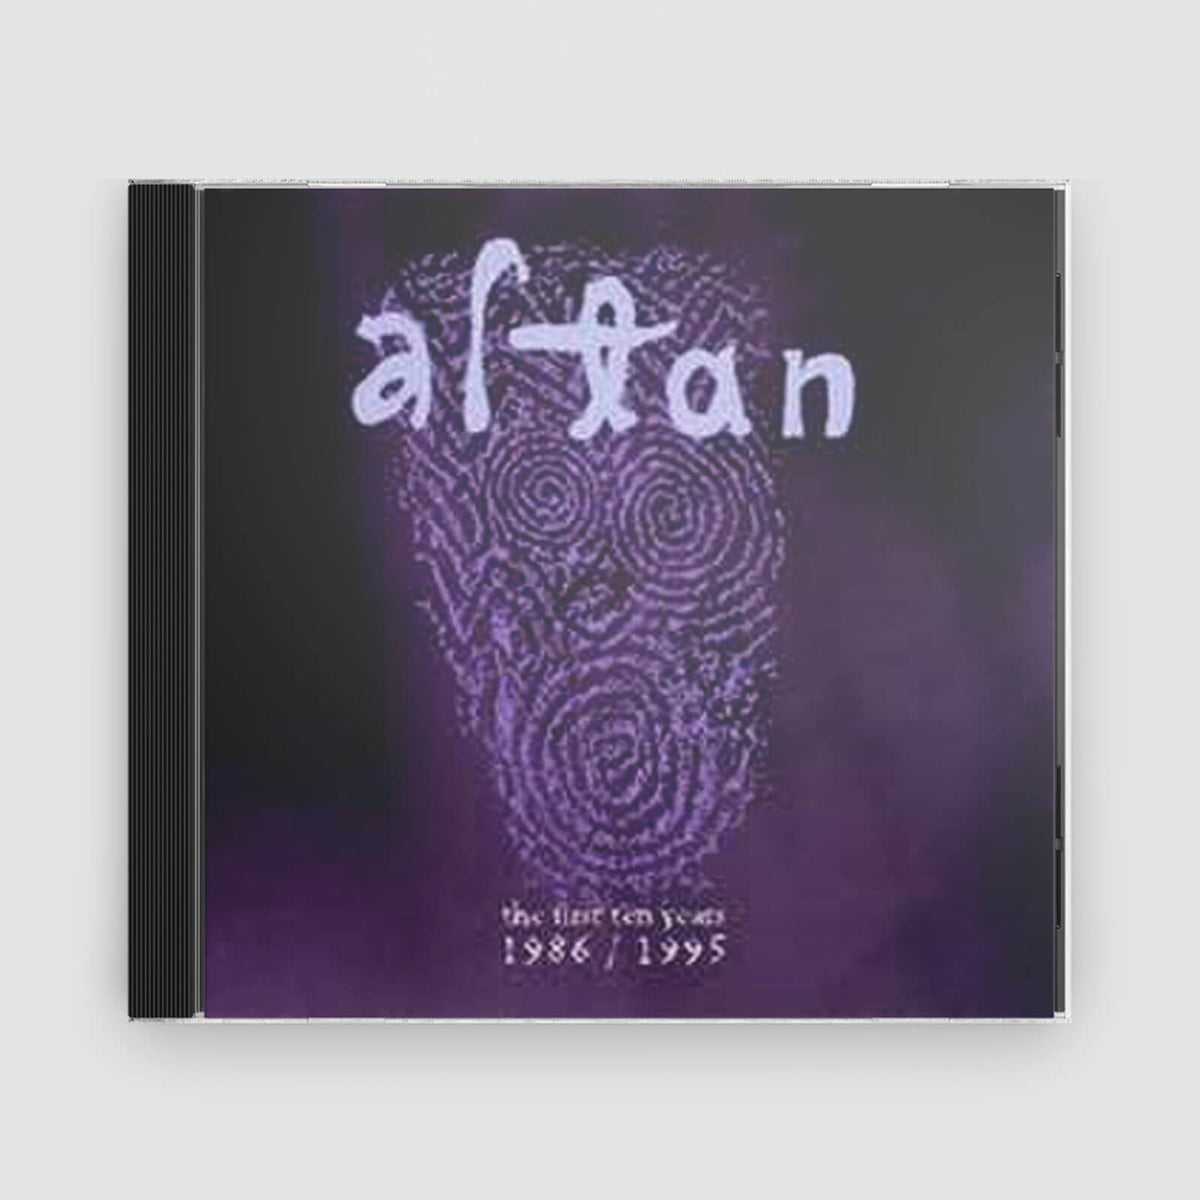 Altan : The First Ten Years 1986-1995